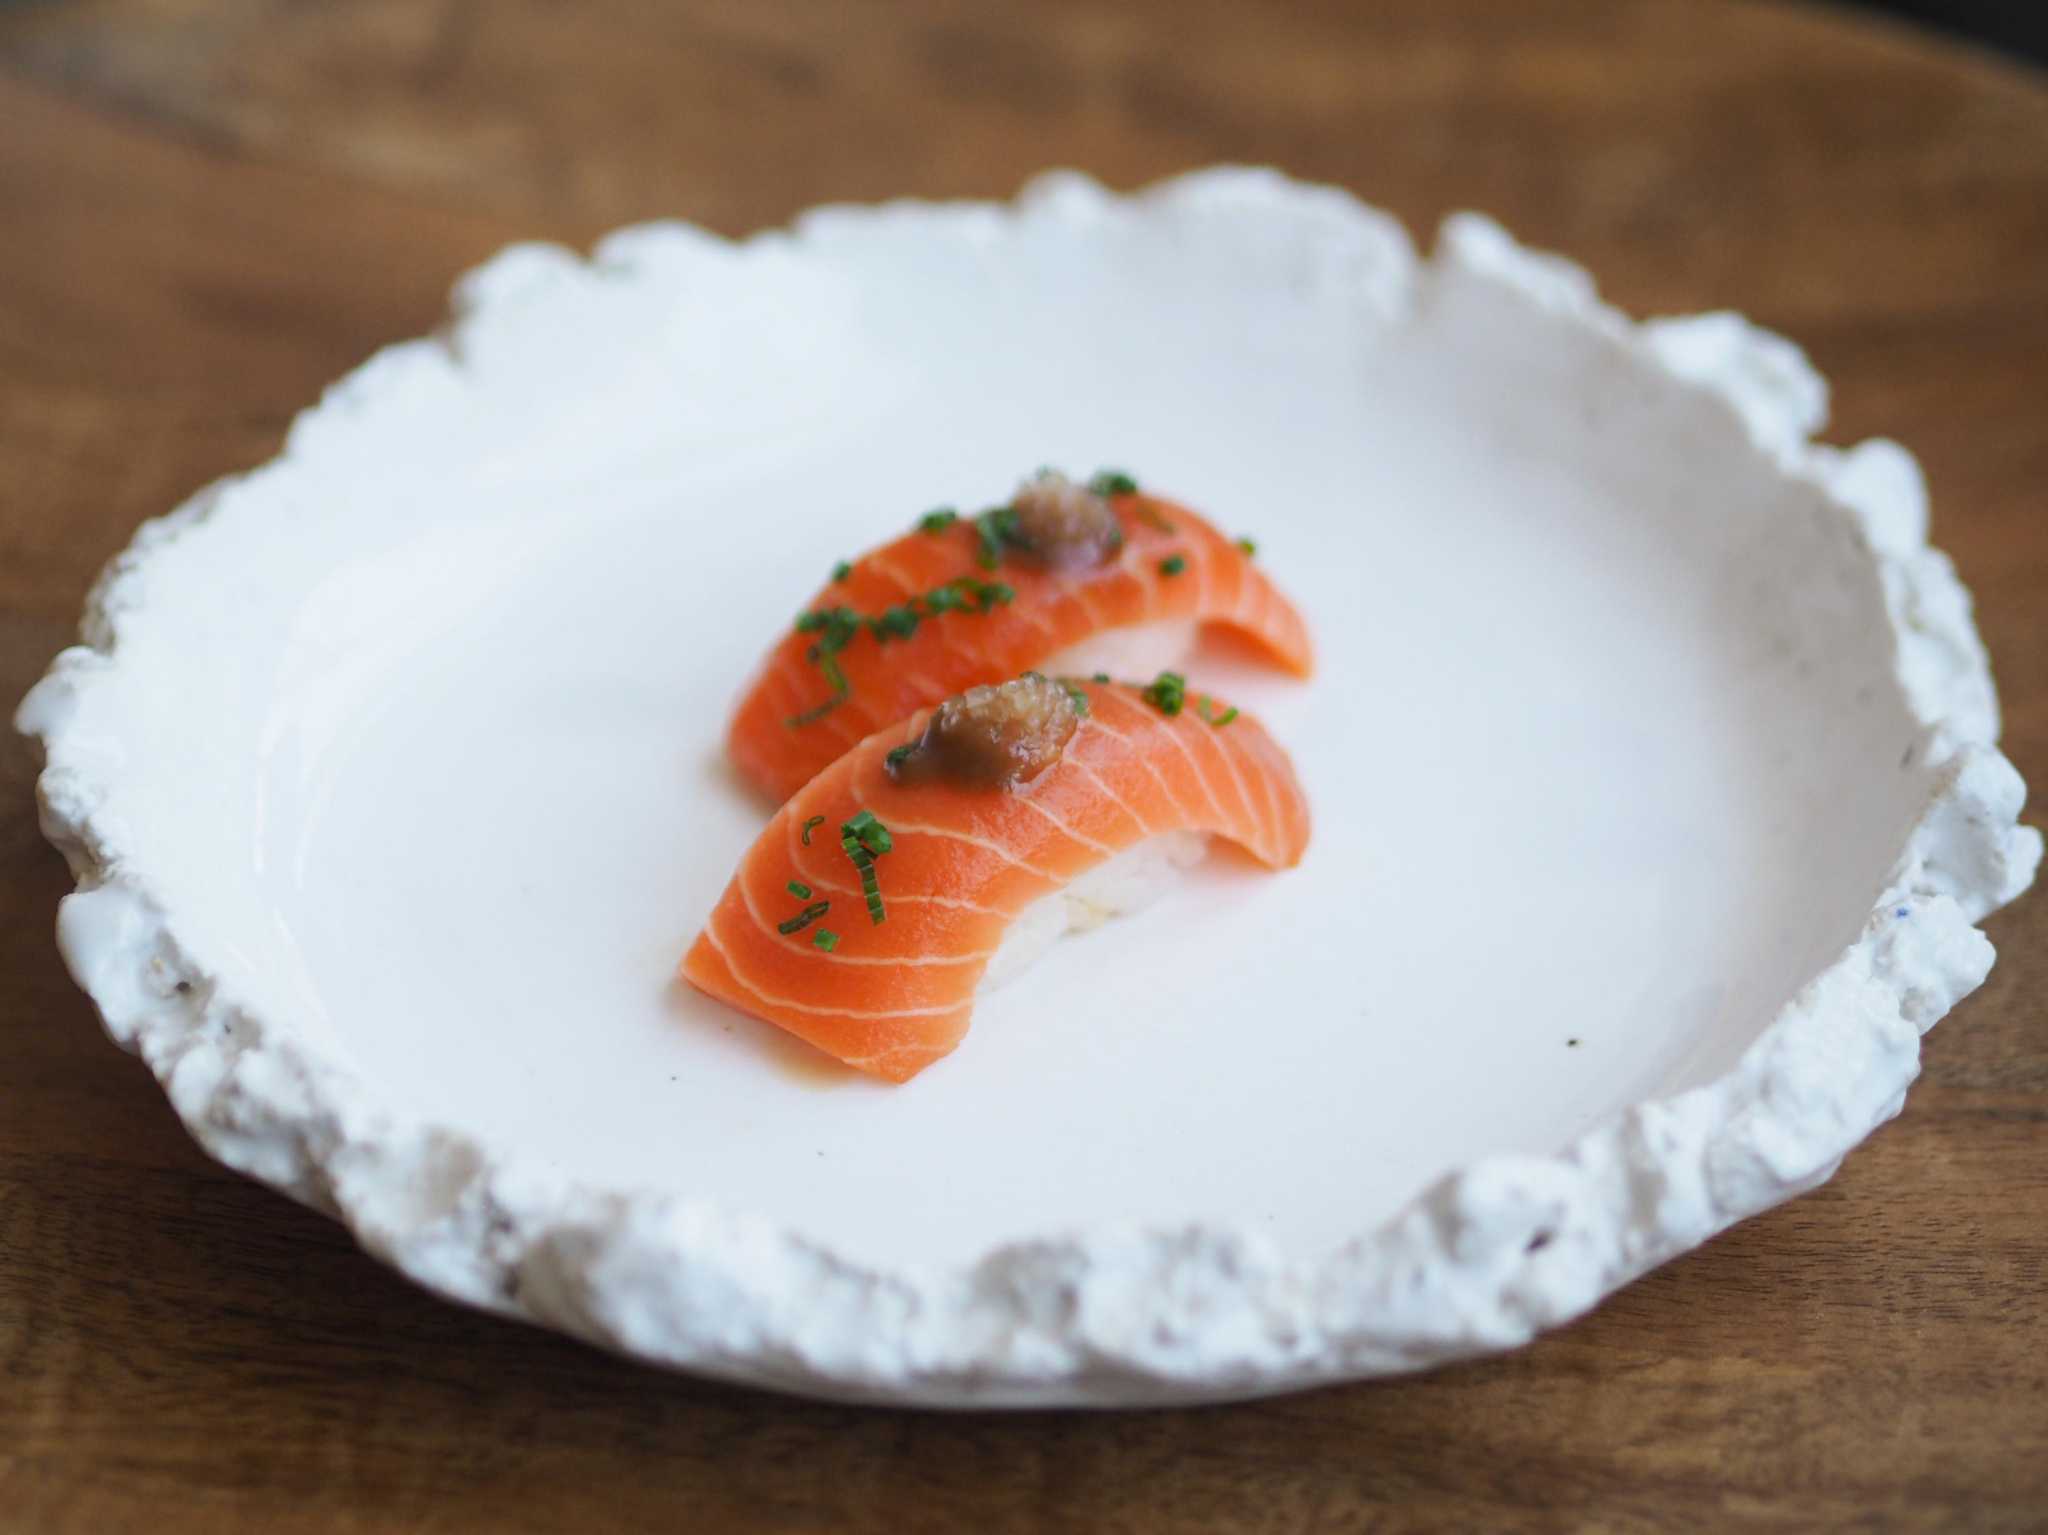 A first-of-its-kind sushi bar dedicated to serving lab-grown salmon is gearing up to open in S.F.’s Dogpatch neighborhood. A first-of-its-kind s